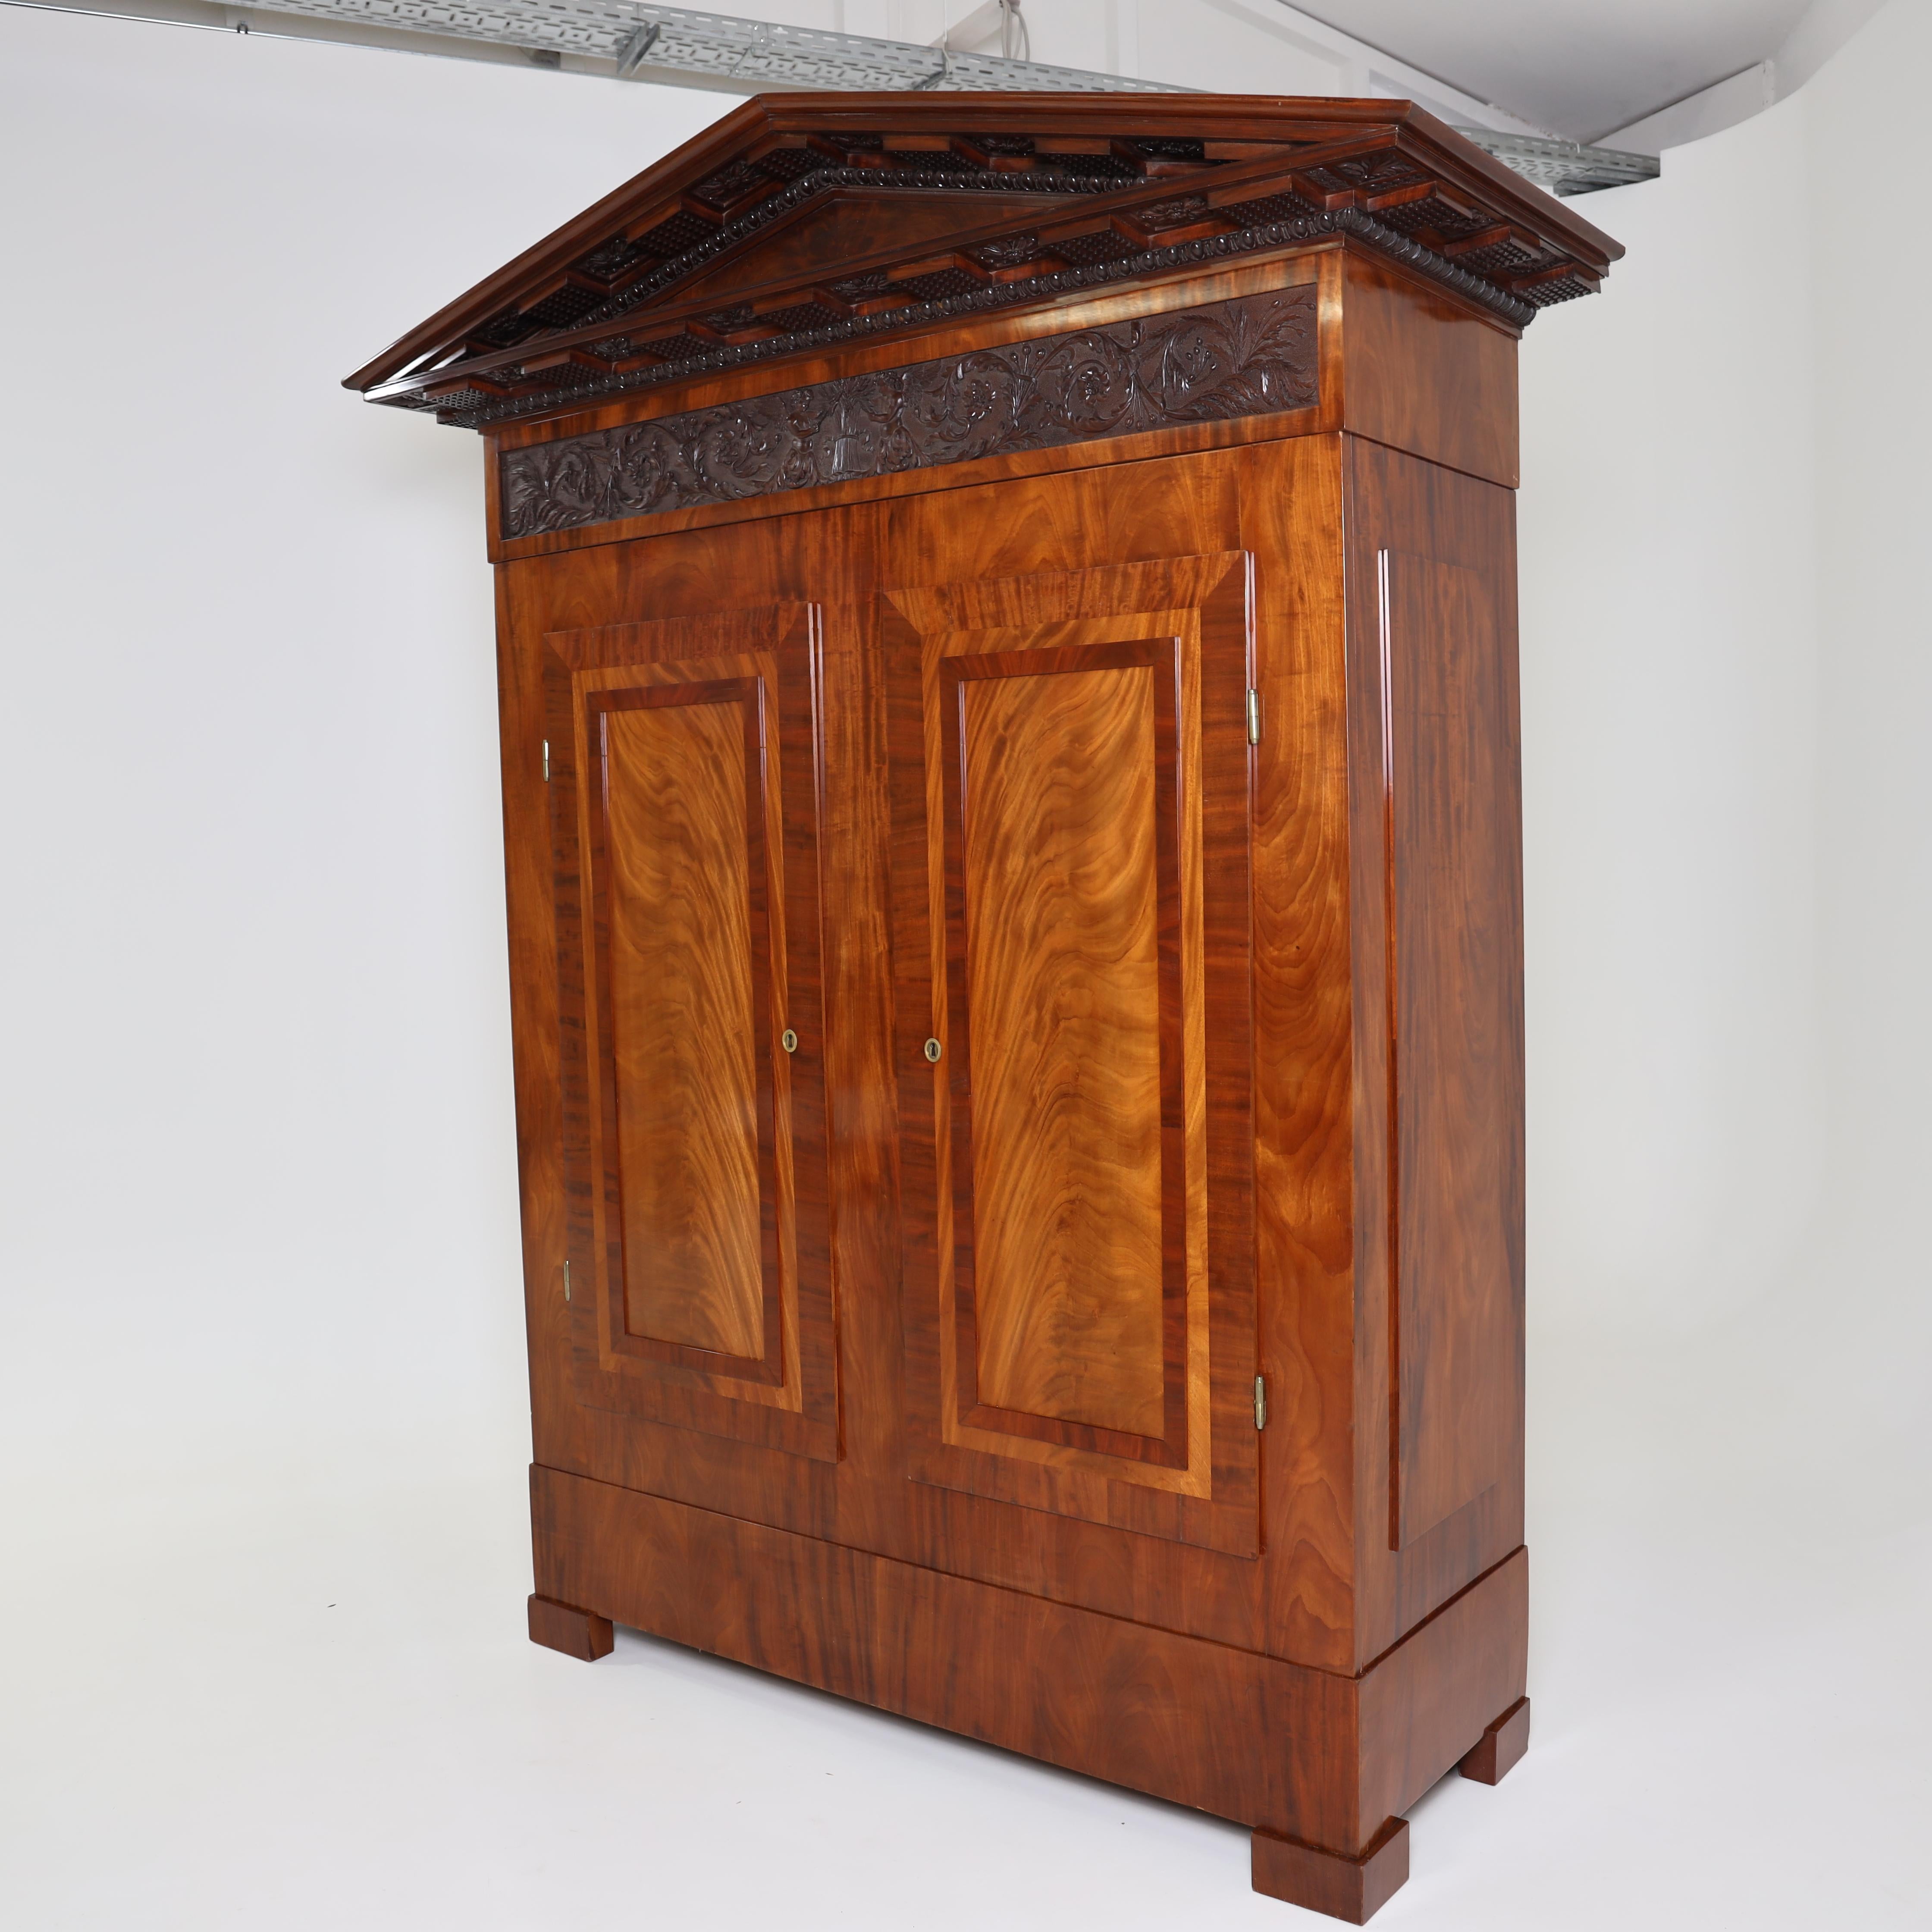 Two-door cabinet with smooth front with panels veneered in mahogany. The smooth plinth rests on low square feet. The temple-like pediment with smooth tympanum field is visually set off with a carved and vine decorated frieze and framed by a